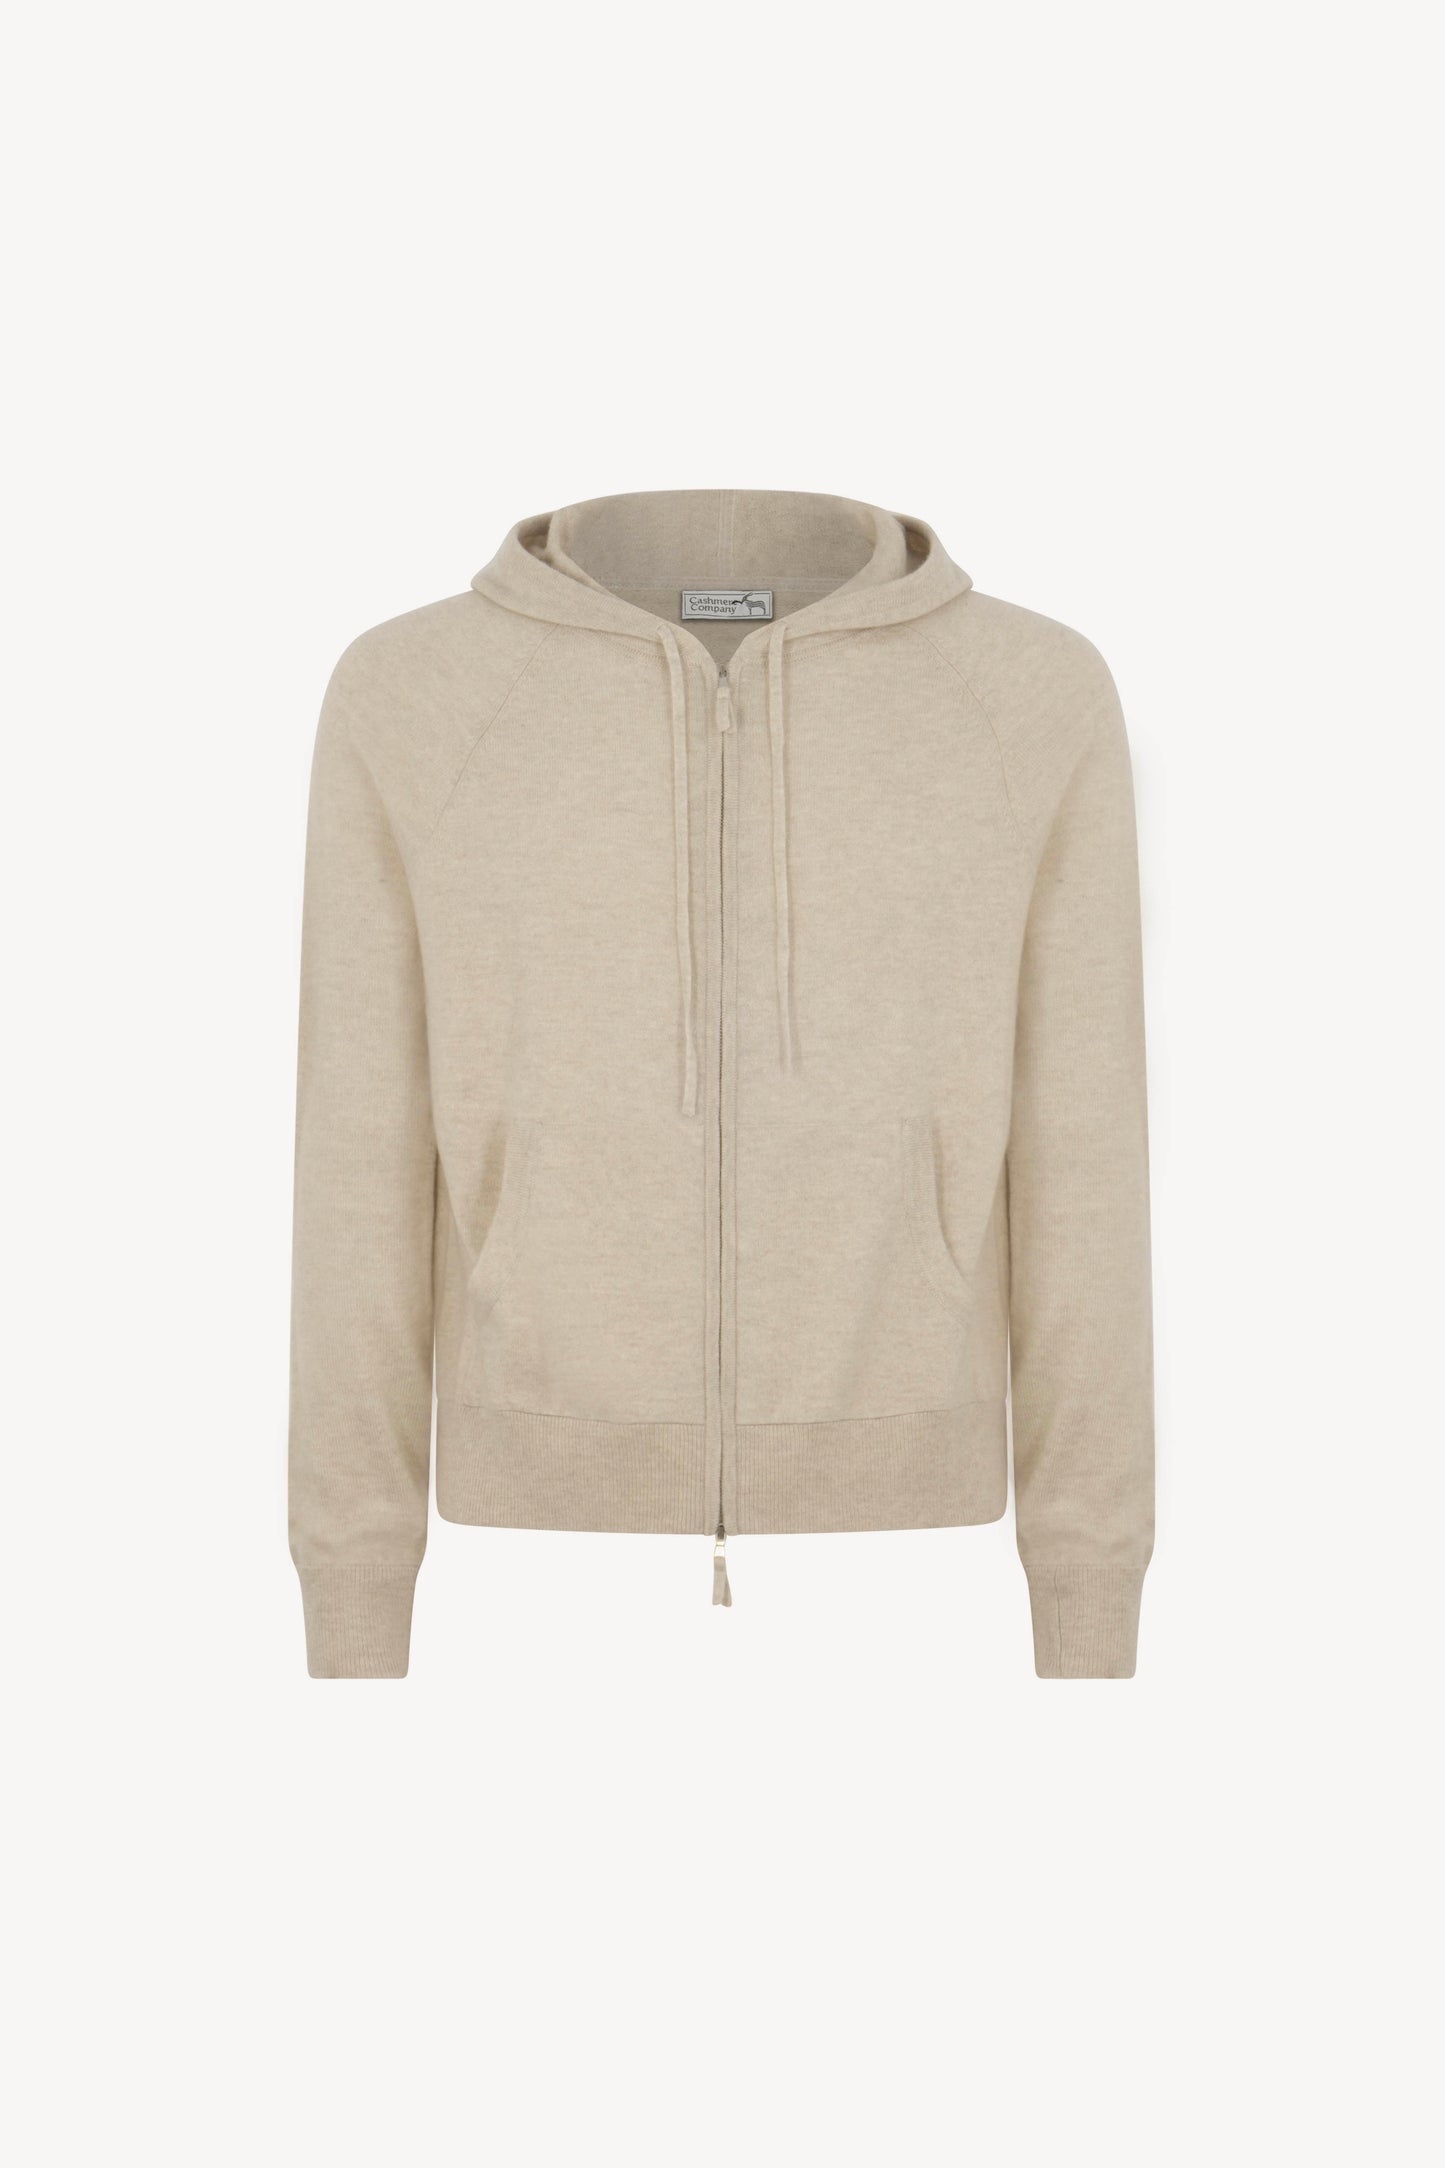 Pure Cashmere Men's Hooded Bomber Jacket